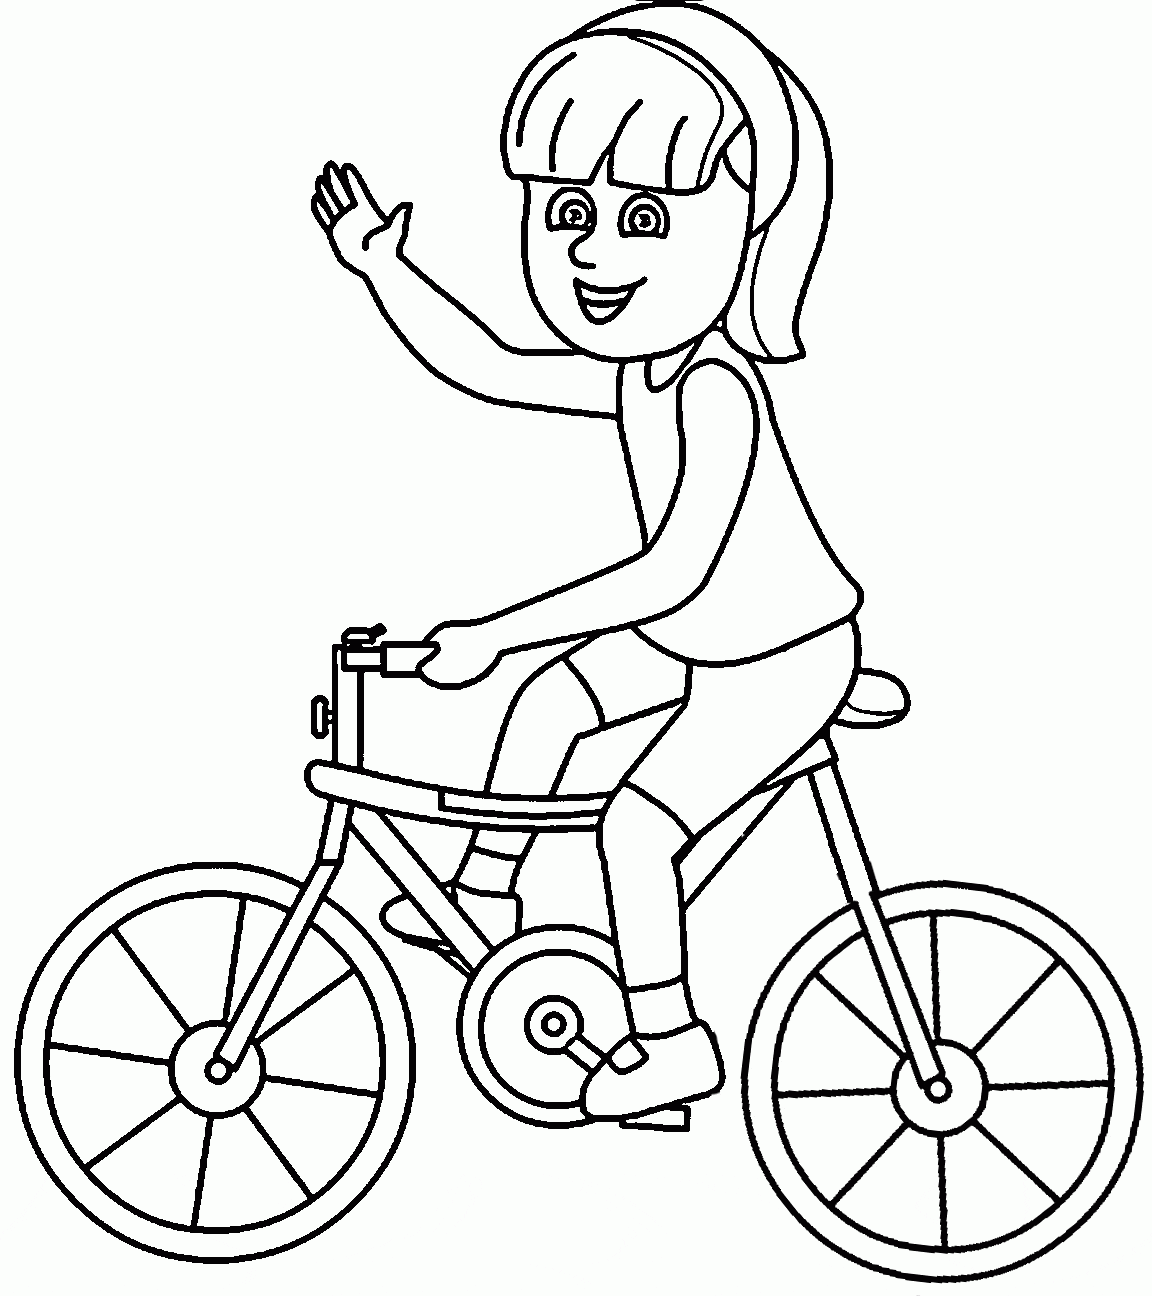 Riding Girl On Bicycle